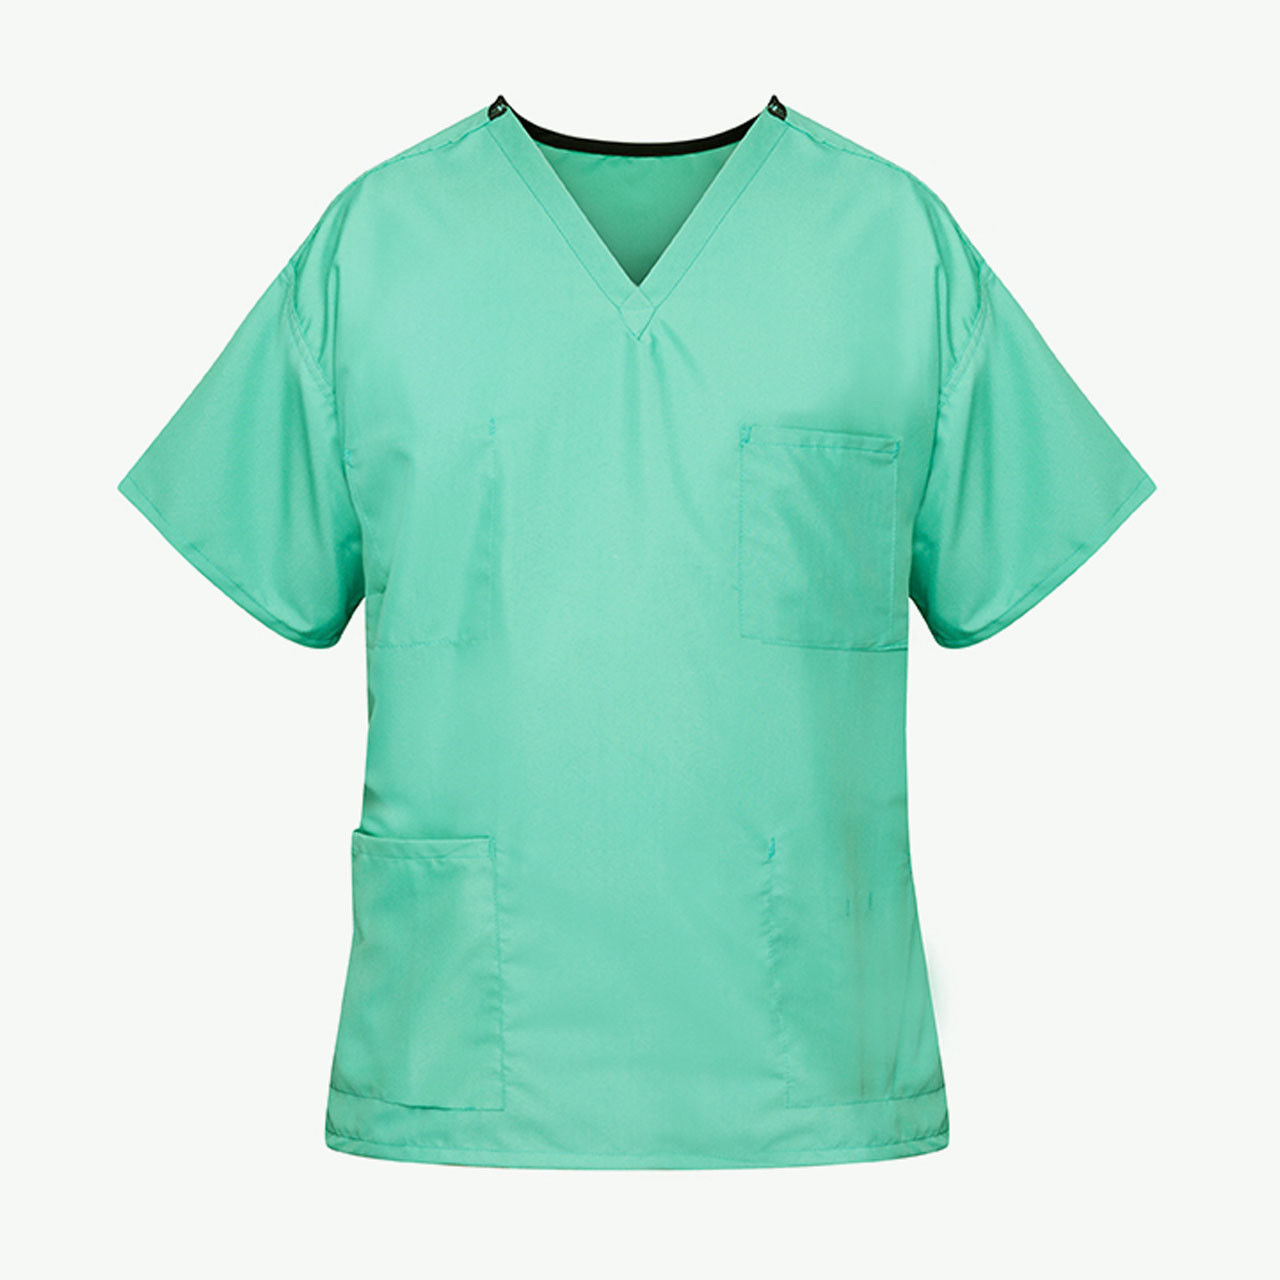 What does the practical color-coded design on the jade green scrubs allow for?